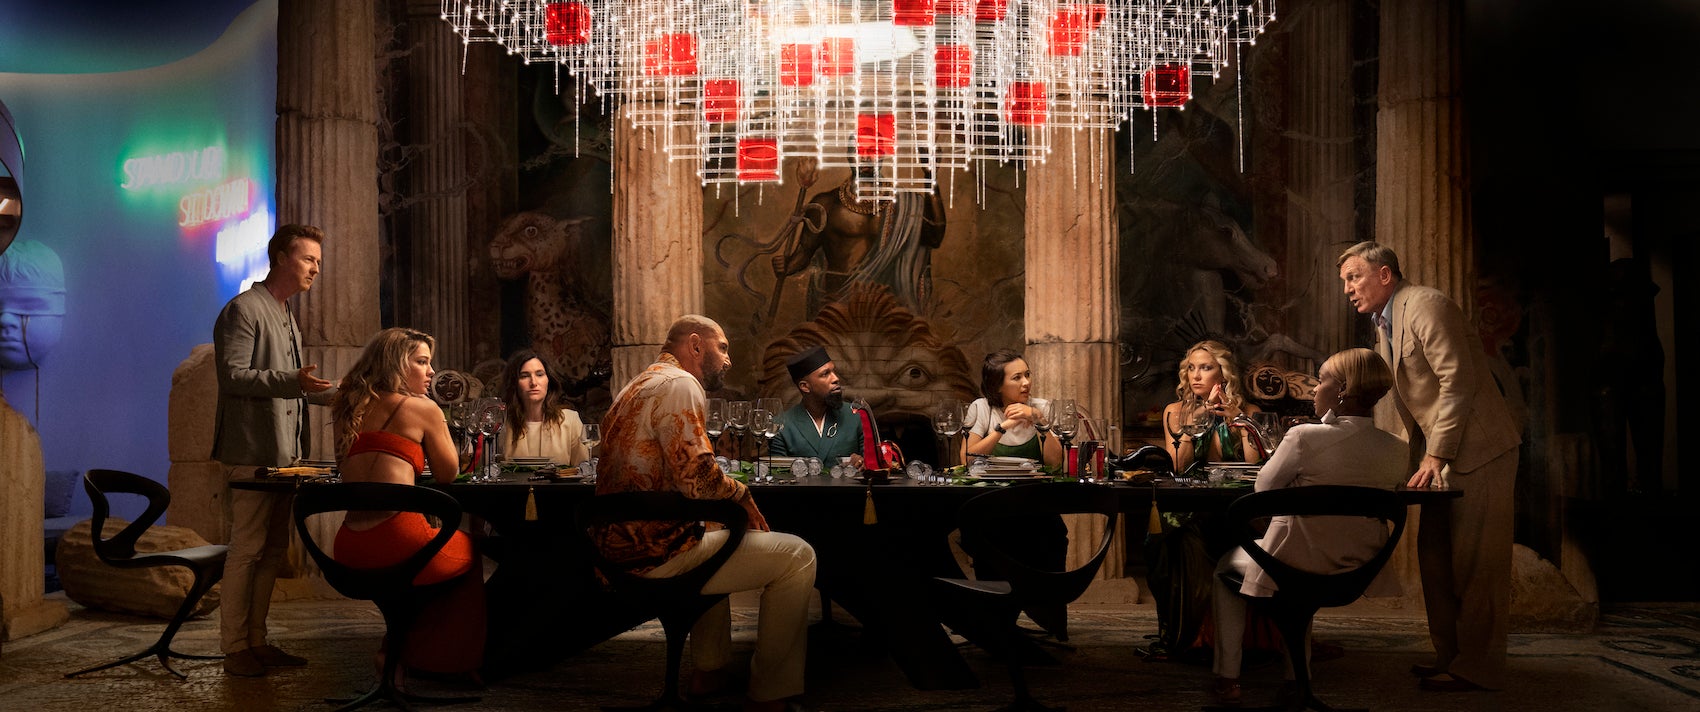 (L-R) Edward Norton, Madelyn Cline, Kathryn Hahn, Dave Bautista, Leslie Odom Jr., Jessica Henwick, Kate Hudson, Janelle Monae, and Daniel Craig in "Glass Onion: A Knives Out Mystery."